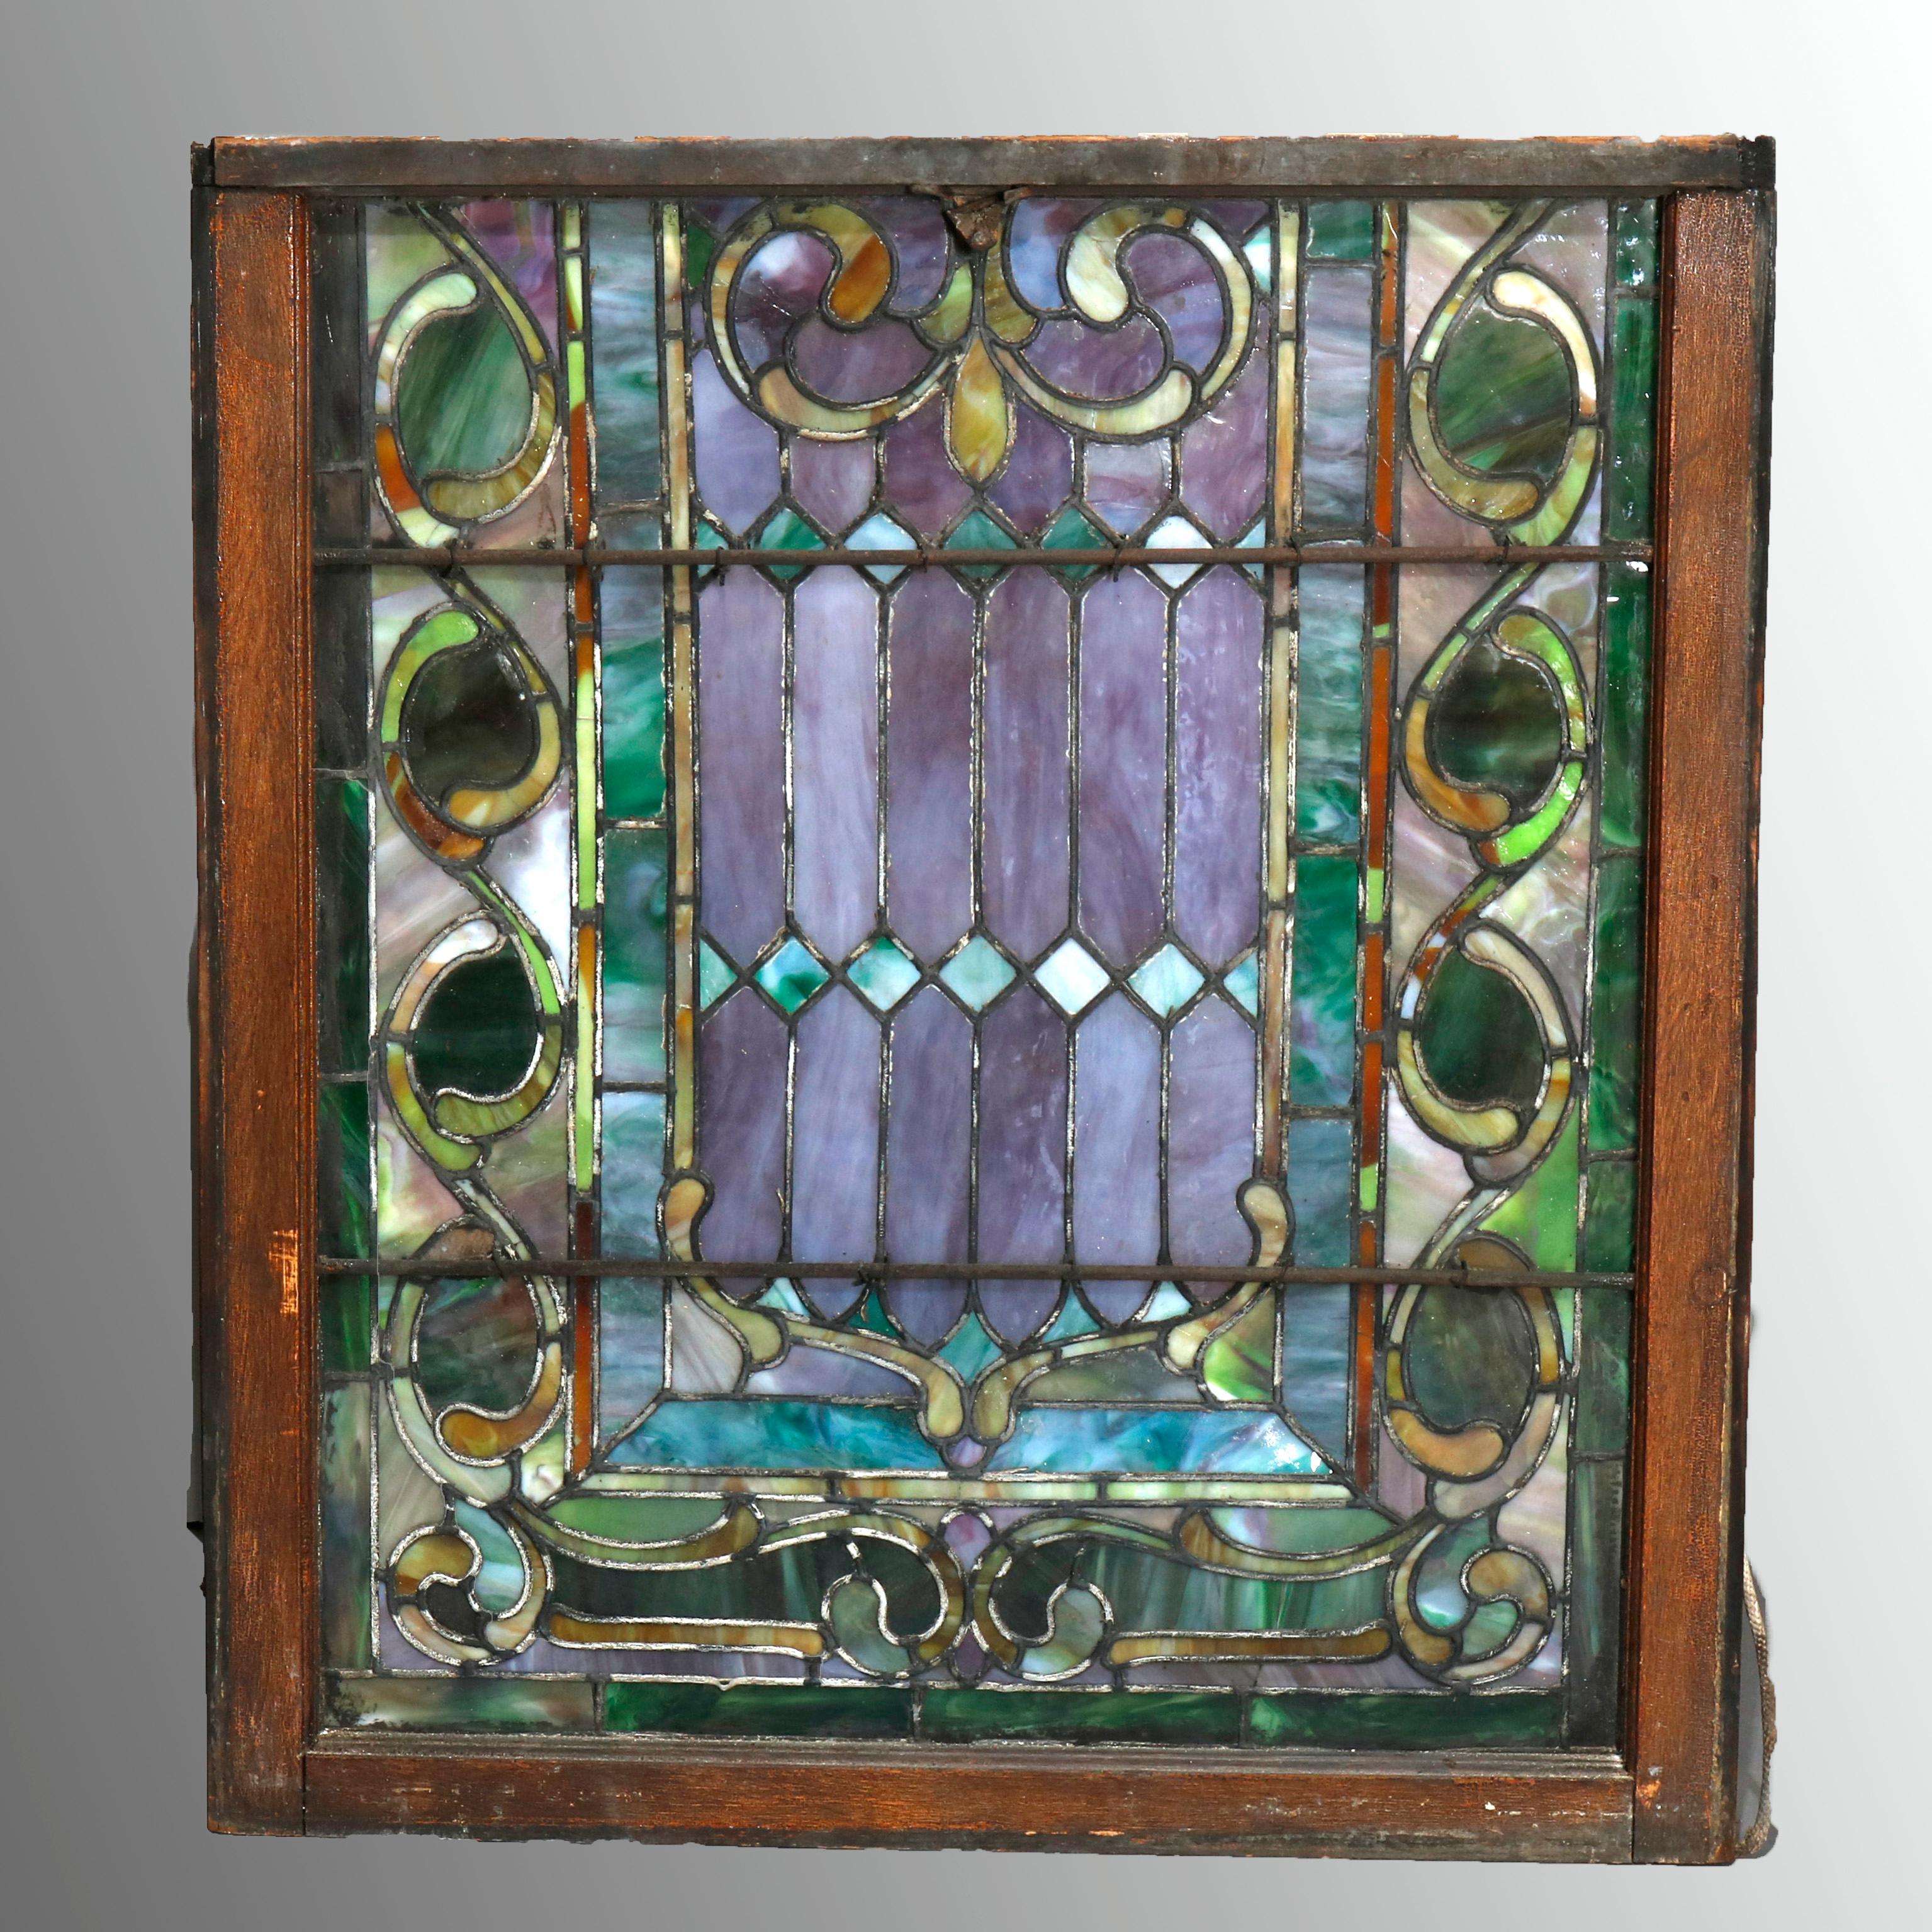 An antique Arts & Crafts mosaic window offers leaded slag glass in scroll and foliate pattern, seated in original sash, circa 1930.

***DELIVERY NOTICE – Due to COVID-19 we are employing NO-CONTACT PRACTICES in the transfer of purchased items. 